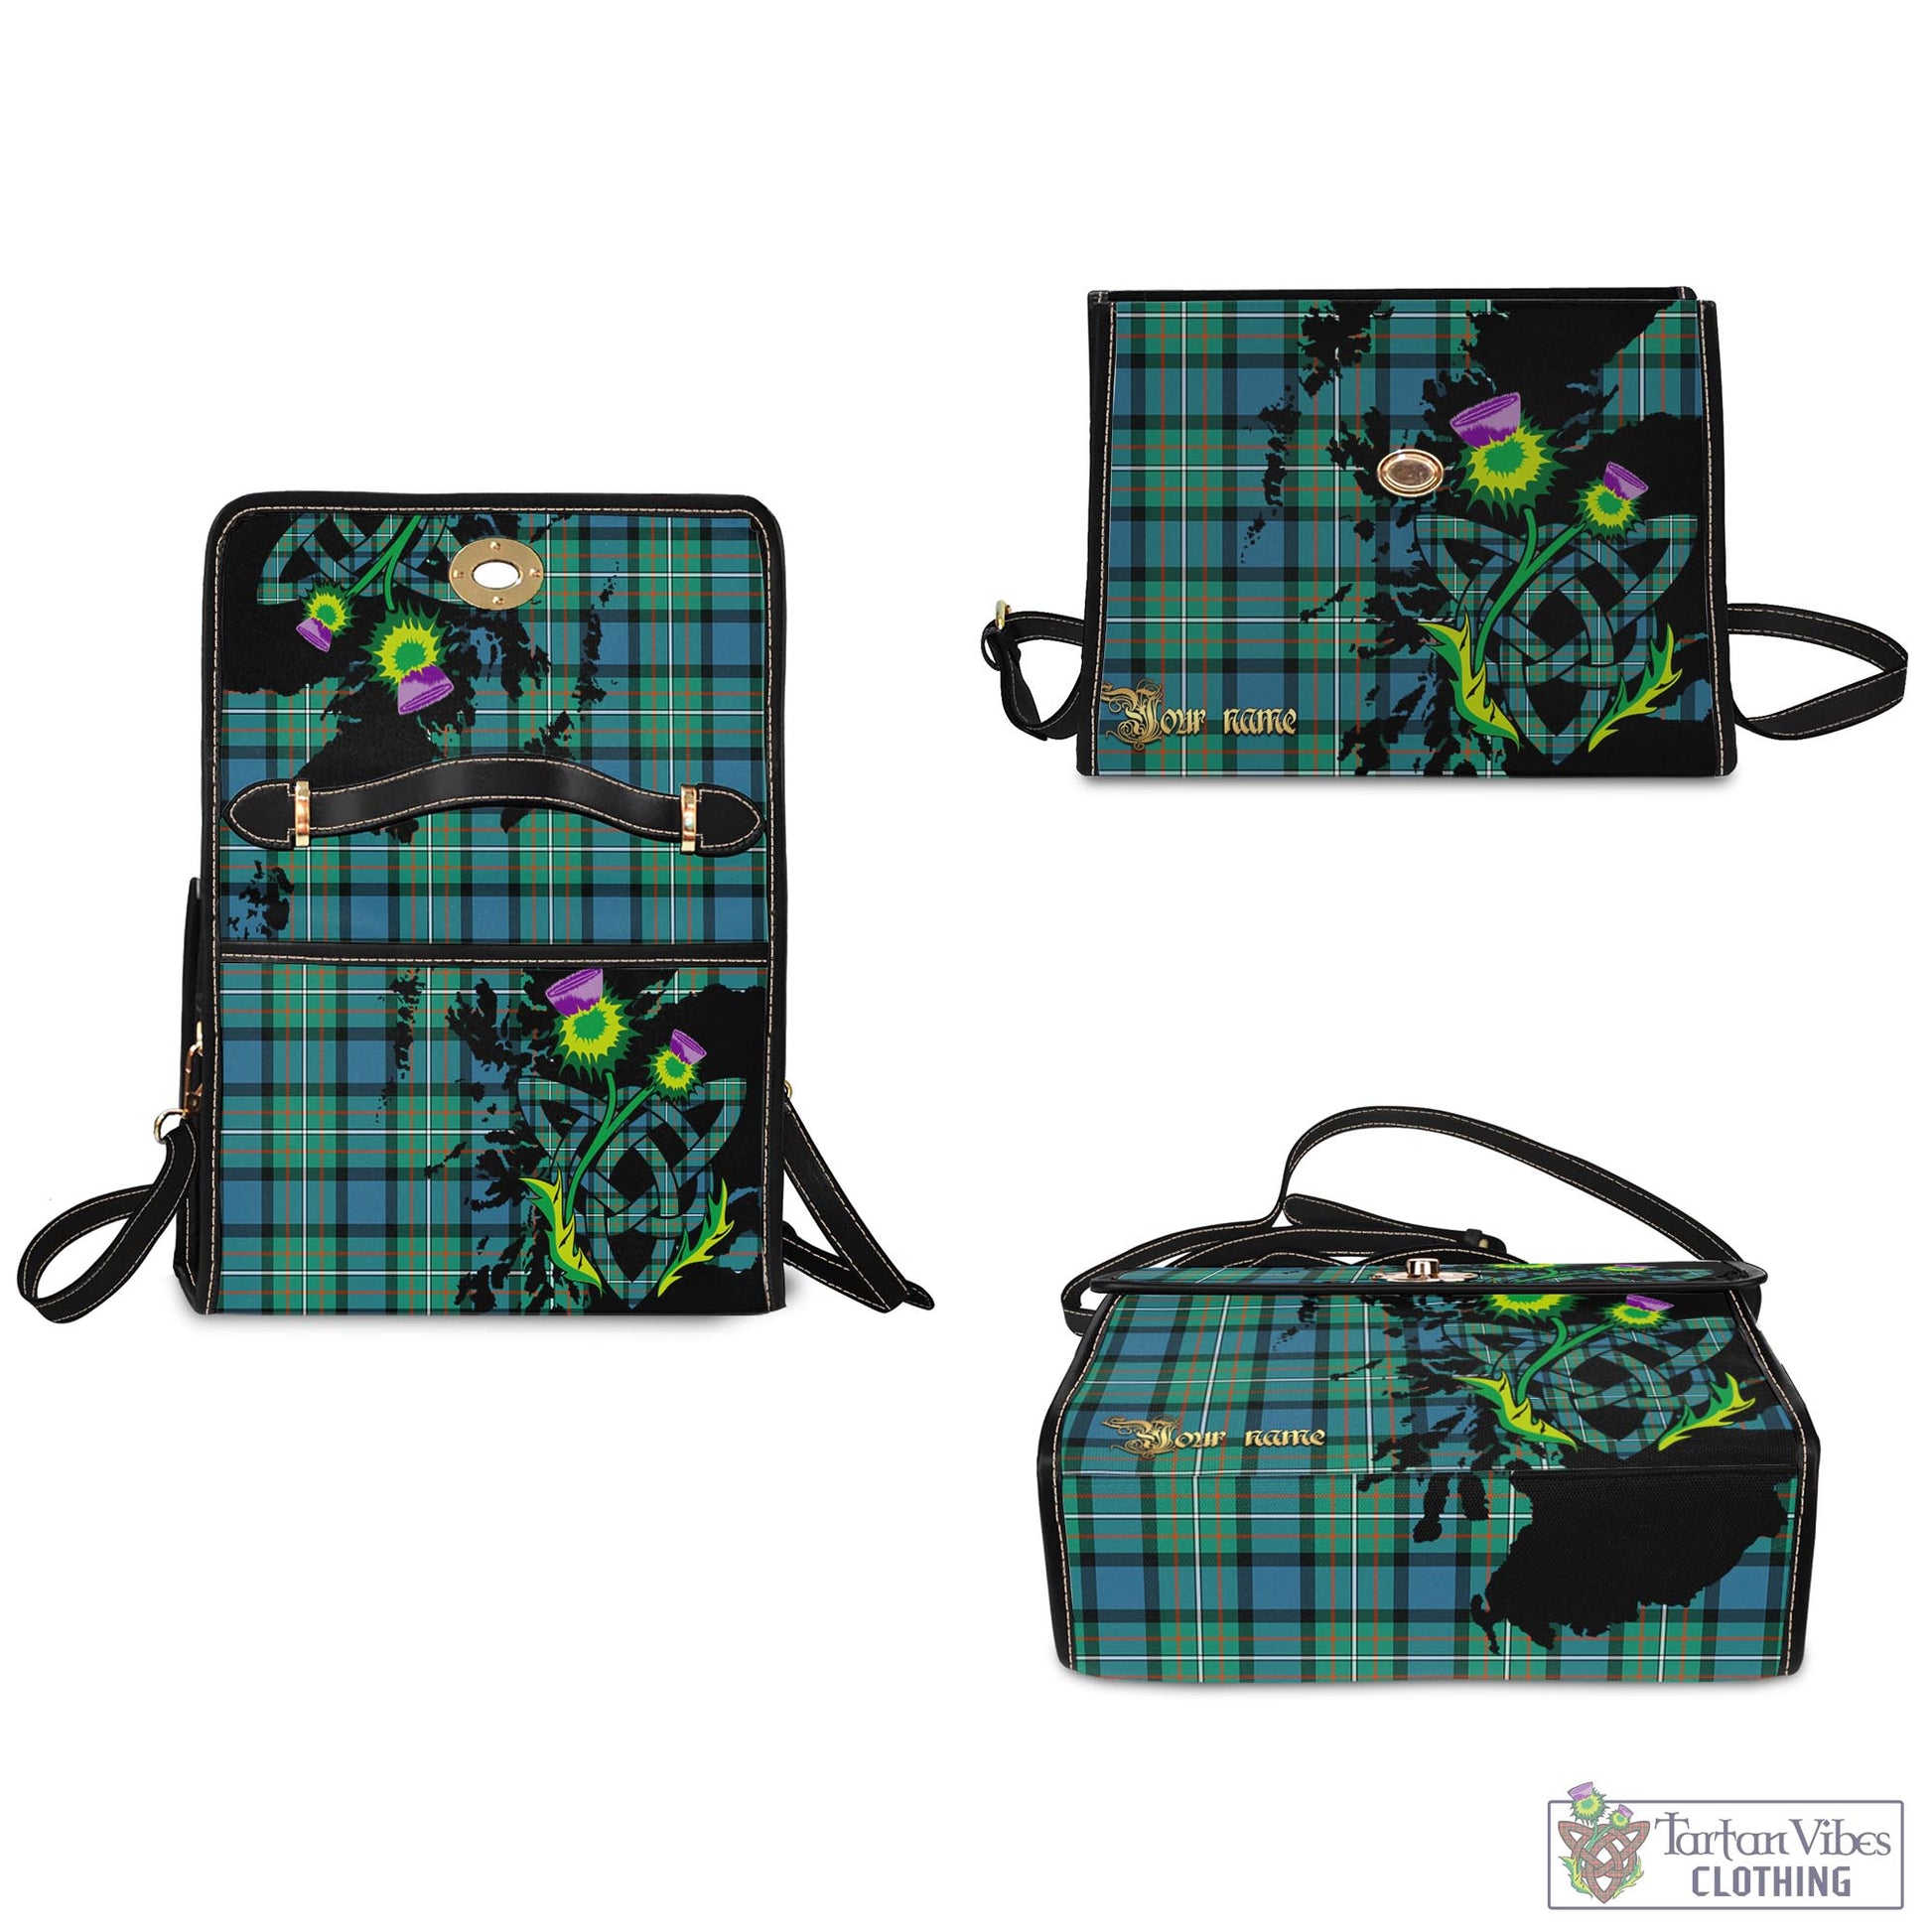 Tartan Vibes Clothing Ferguson Ancient Tartan Waterproof Canvas Bag with Scotland Map and Thistle Celtic Accents